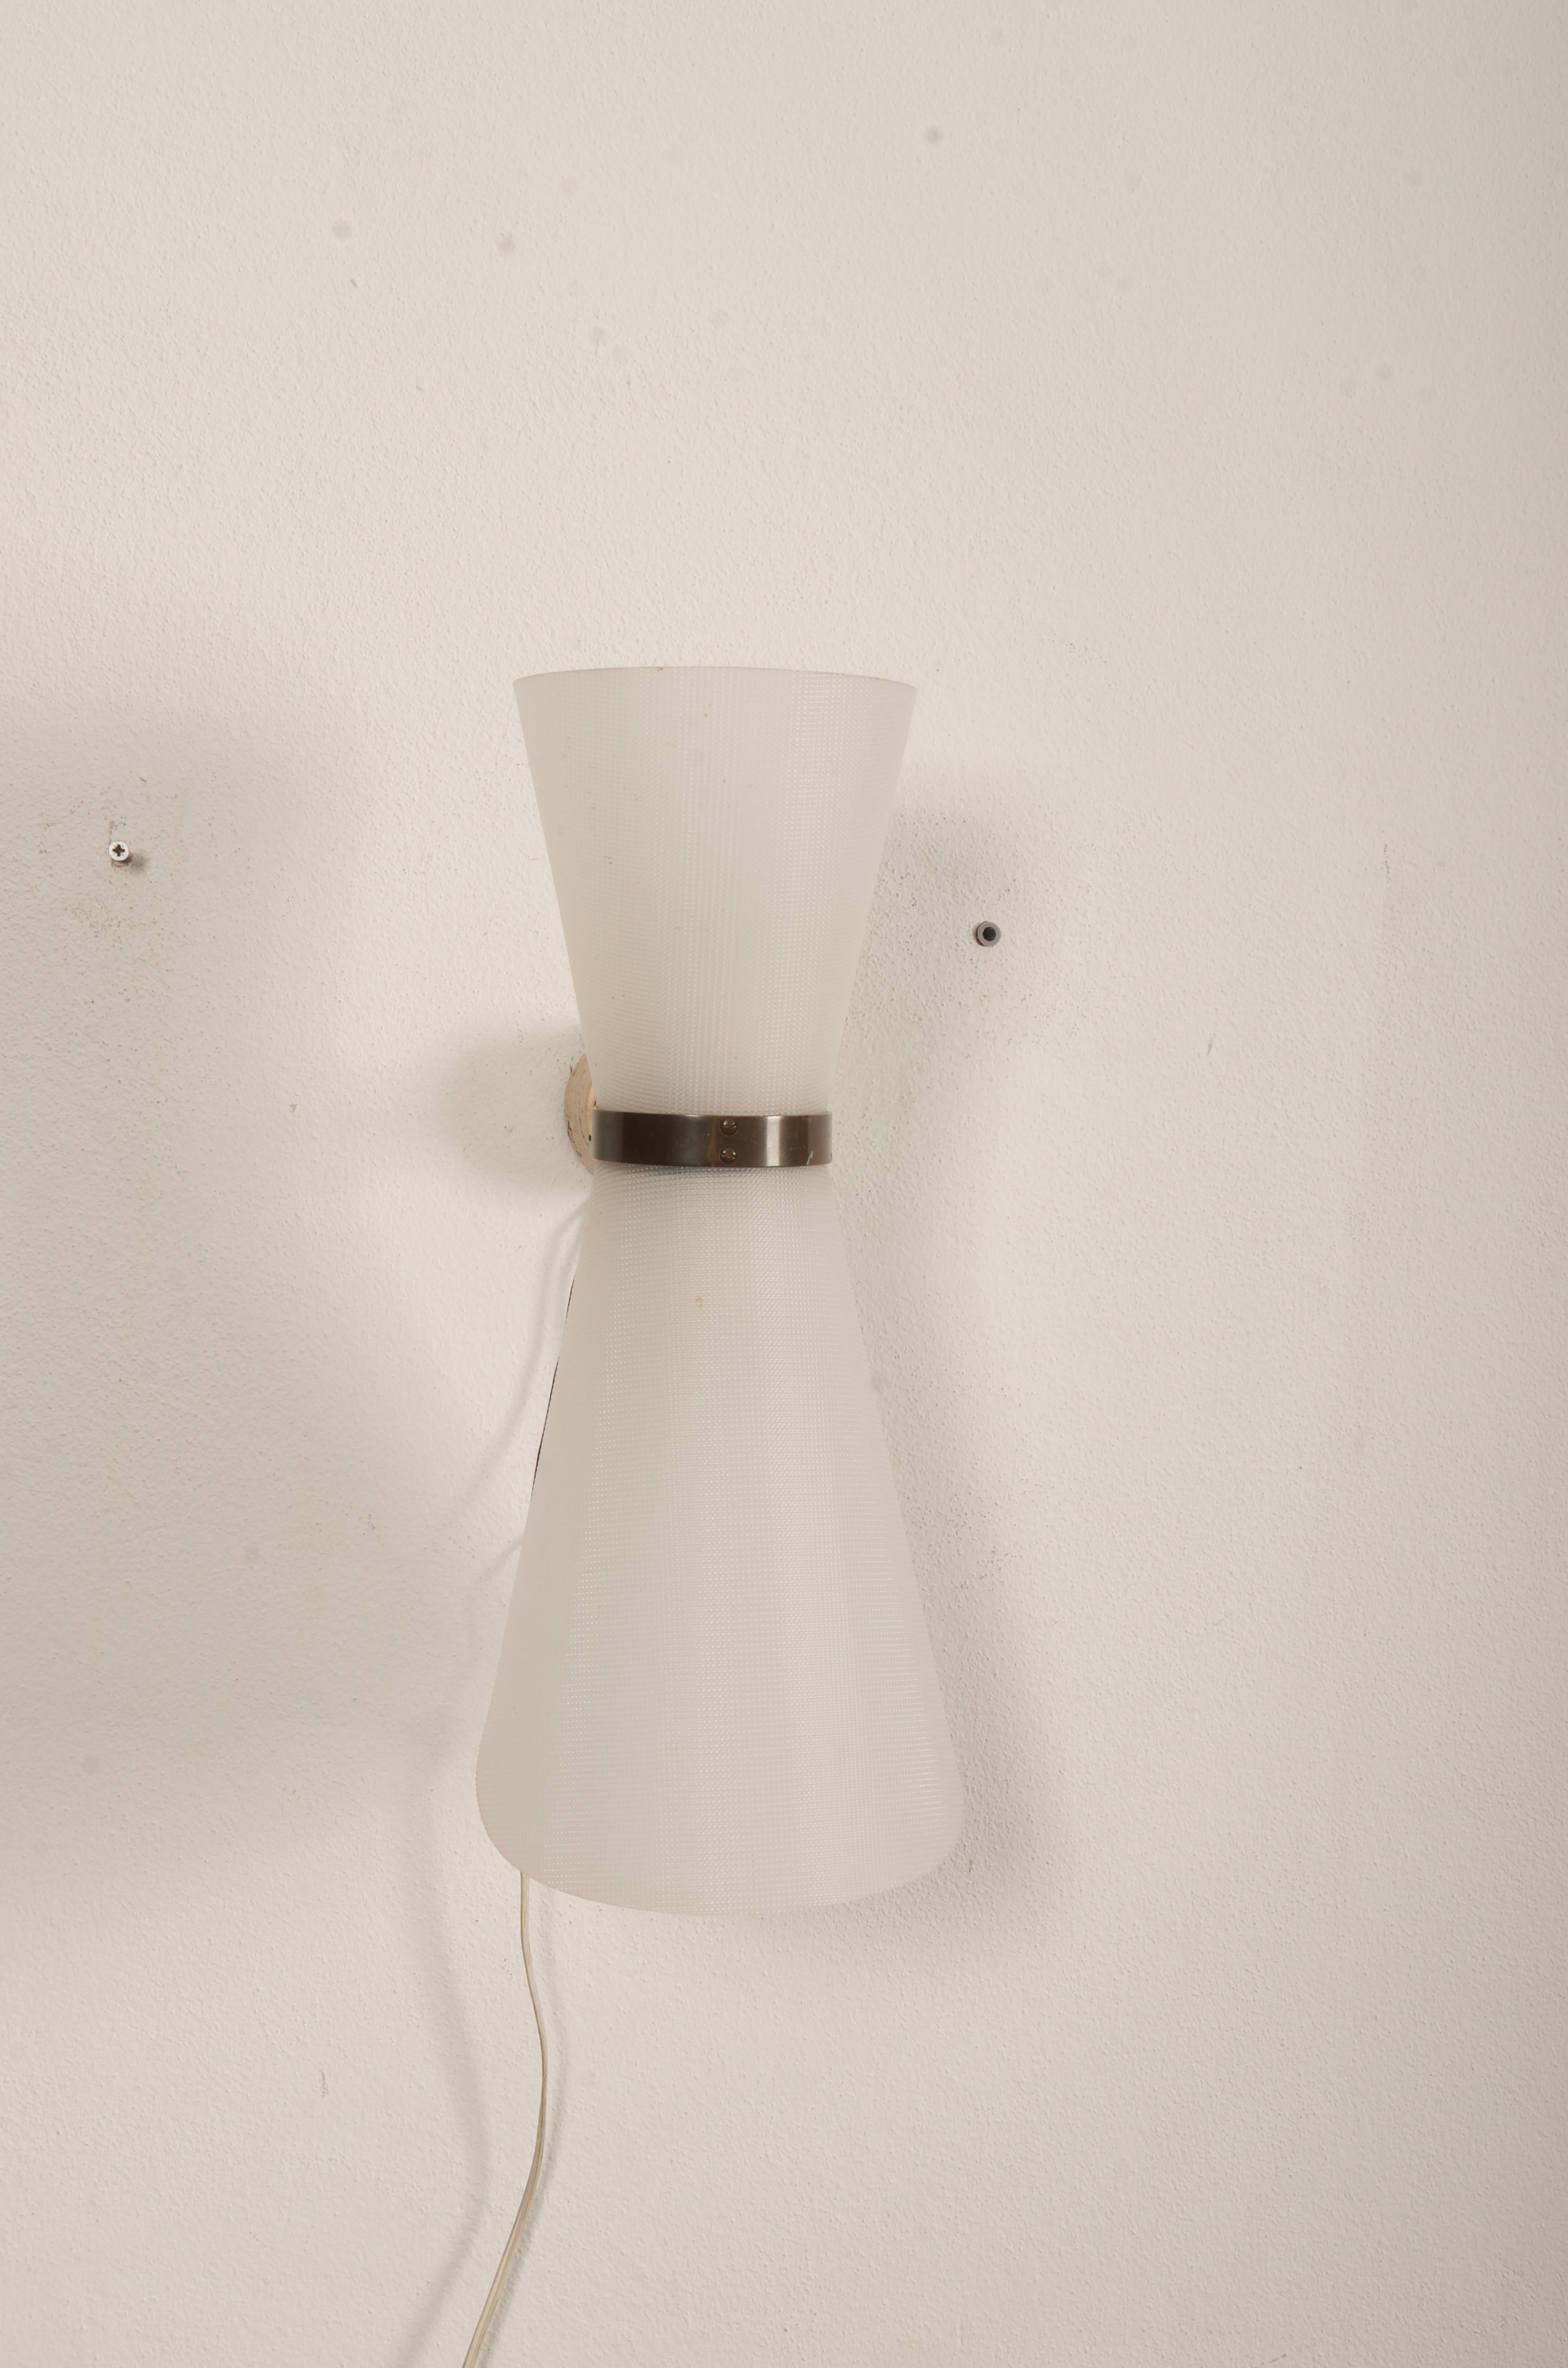 Mid-20th Century Rare Wall Light Sconce by J.T. Kalmar For Sale